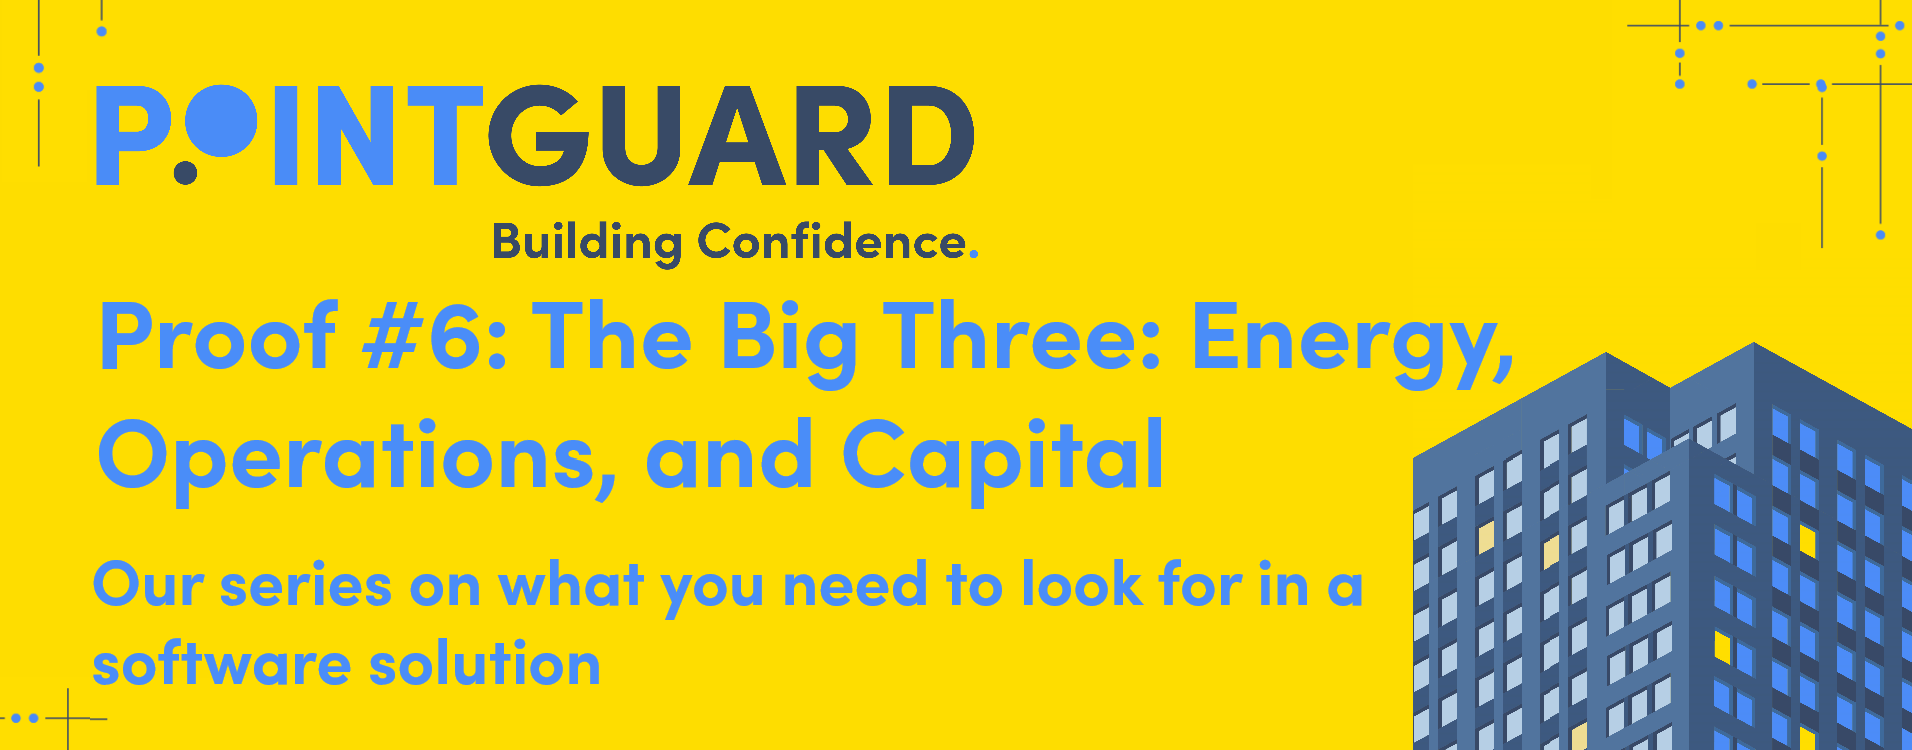 Proof #6: The Big Three: Energy, Operations, and Capital